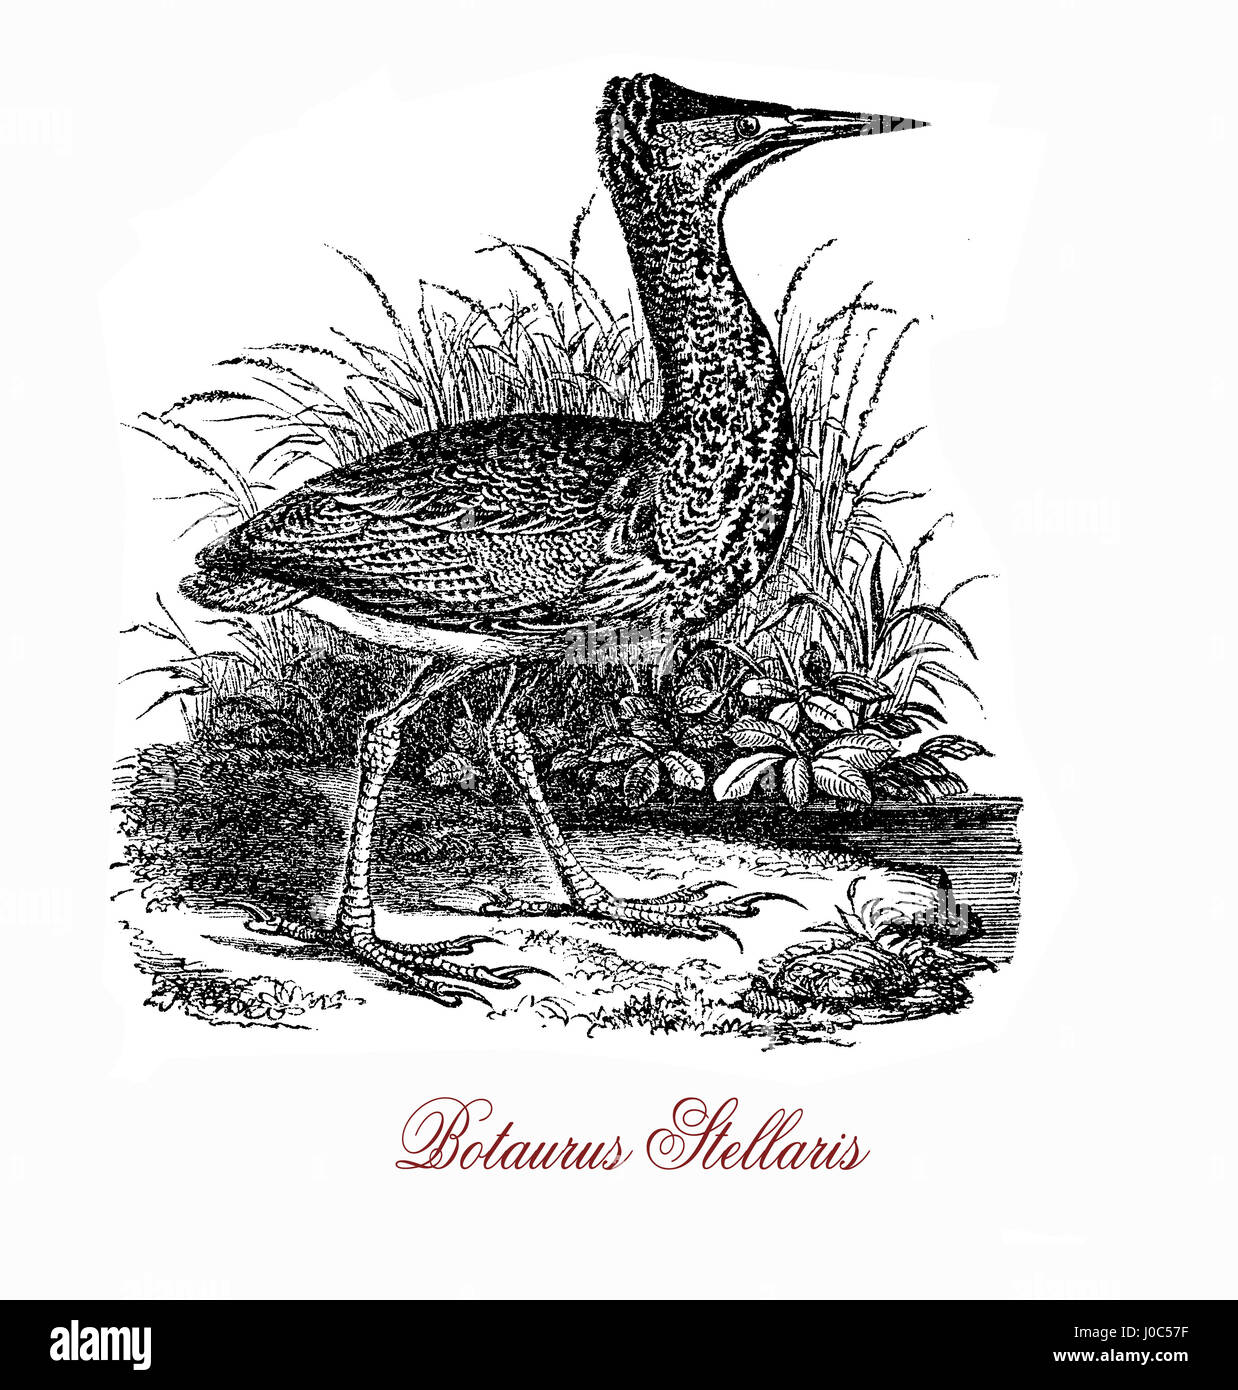 The Eurasian bittern (Botaurus stellaris) is a wading bird  breeding in parts of Europe, Asia, and Africa. It is a secretive bird, seldom seen in the open as it prefers to skulk in reed beds and thick vegetation near water bodies. Stock Photo